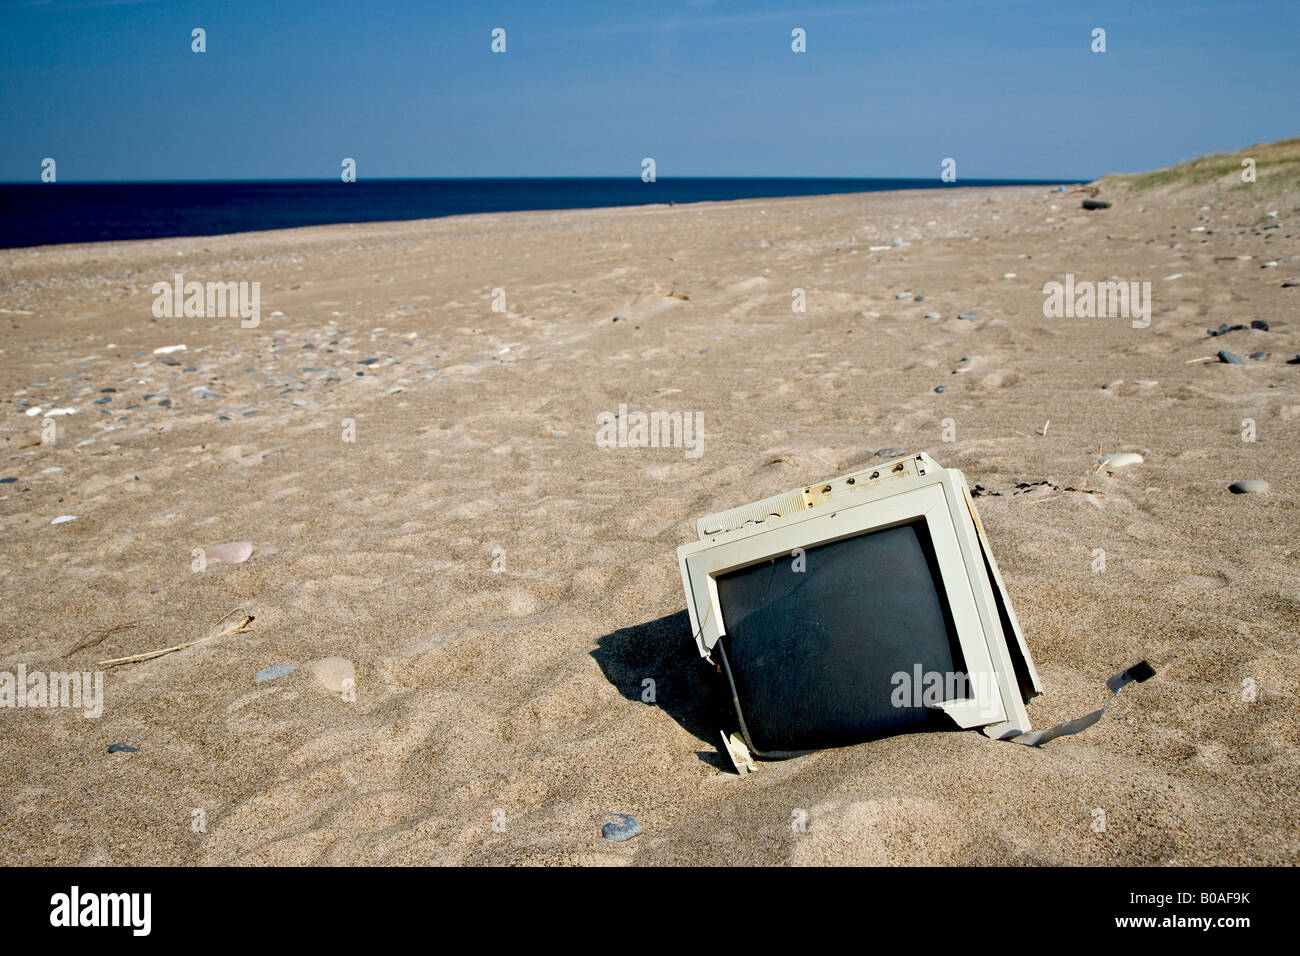 Electronic waste on the beach Stock Photo